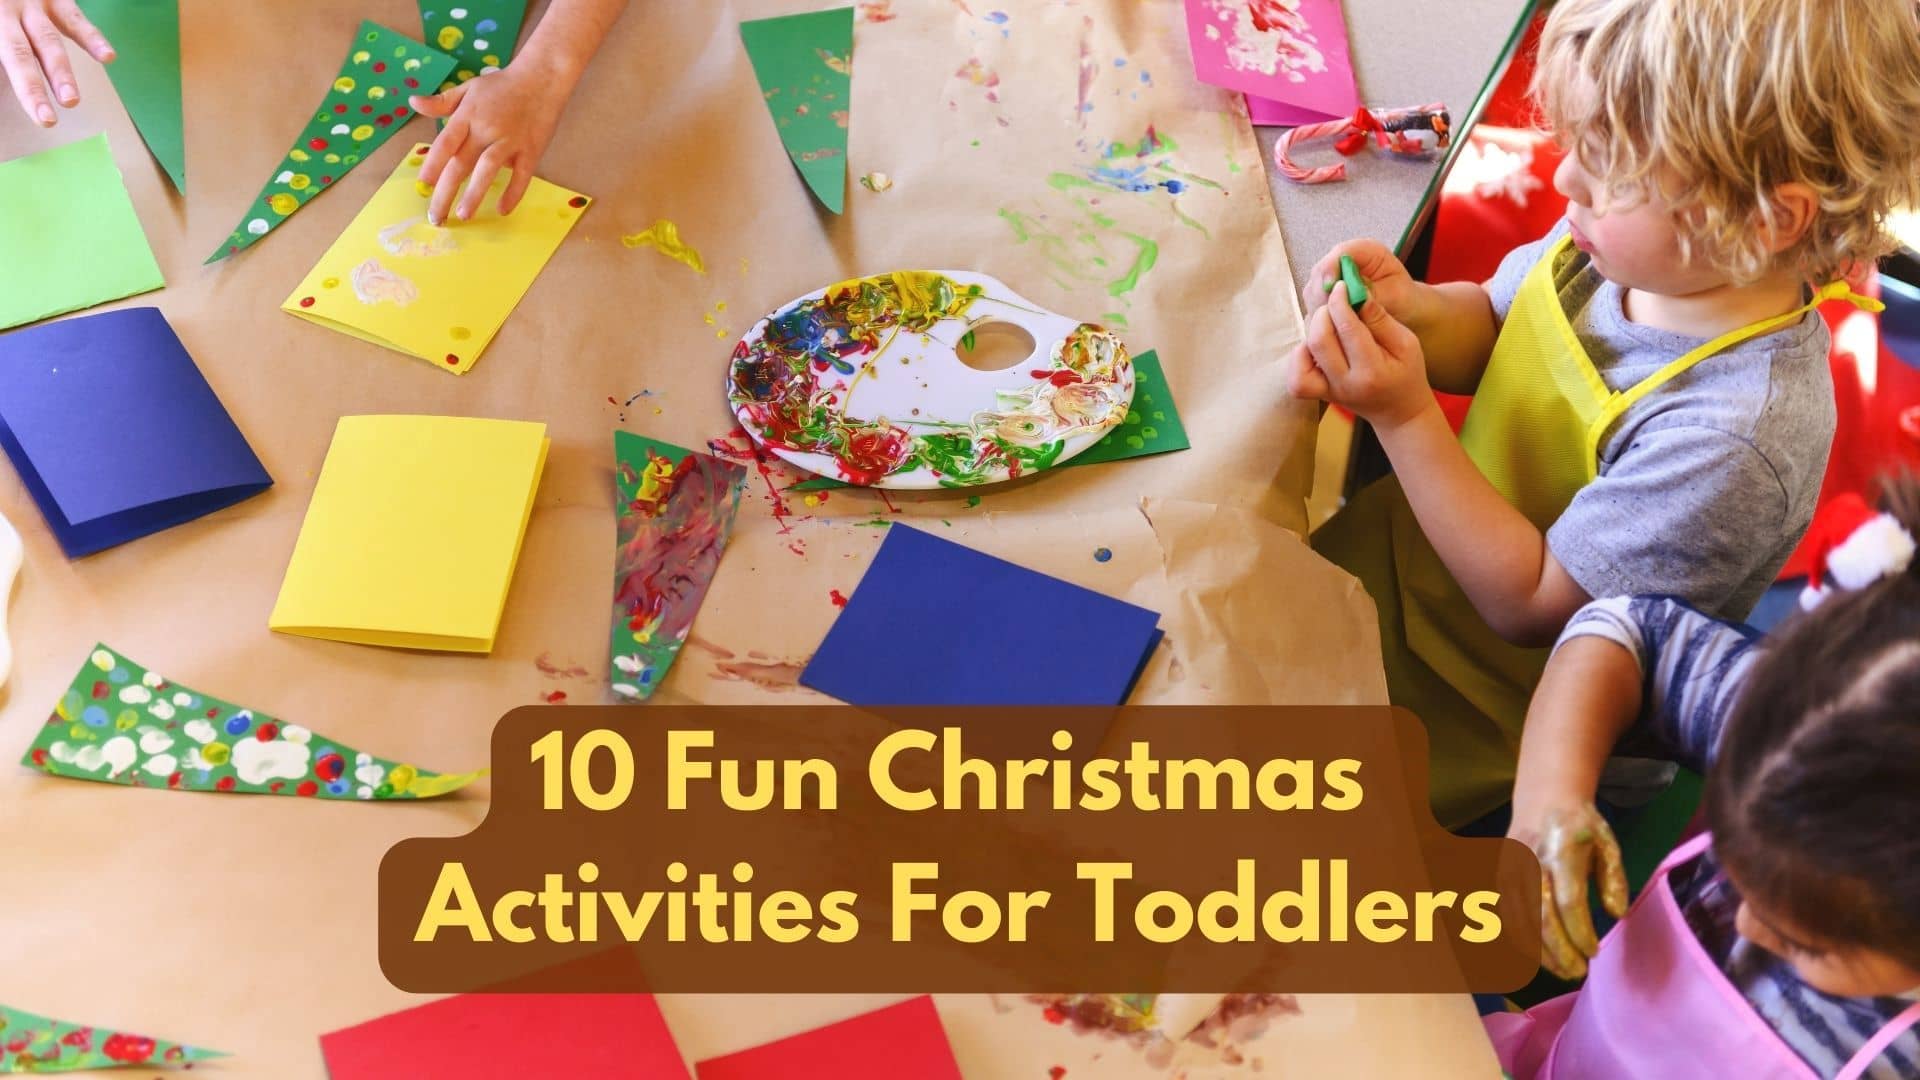 10 Fun Christmas activities for toddlers